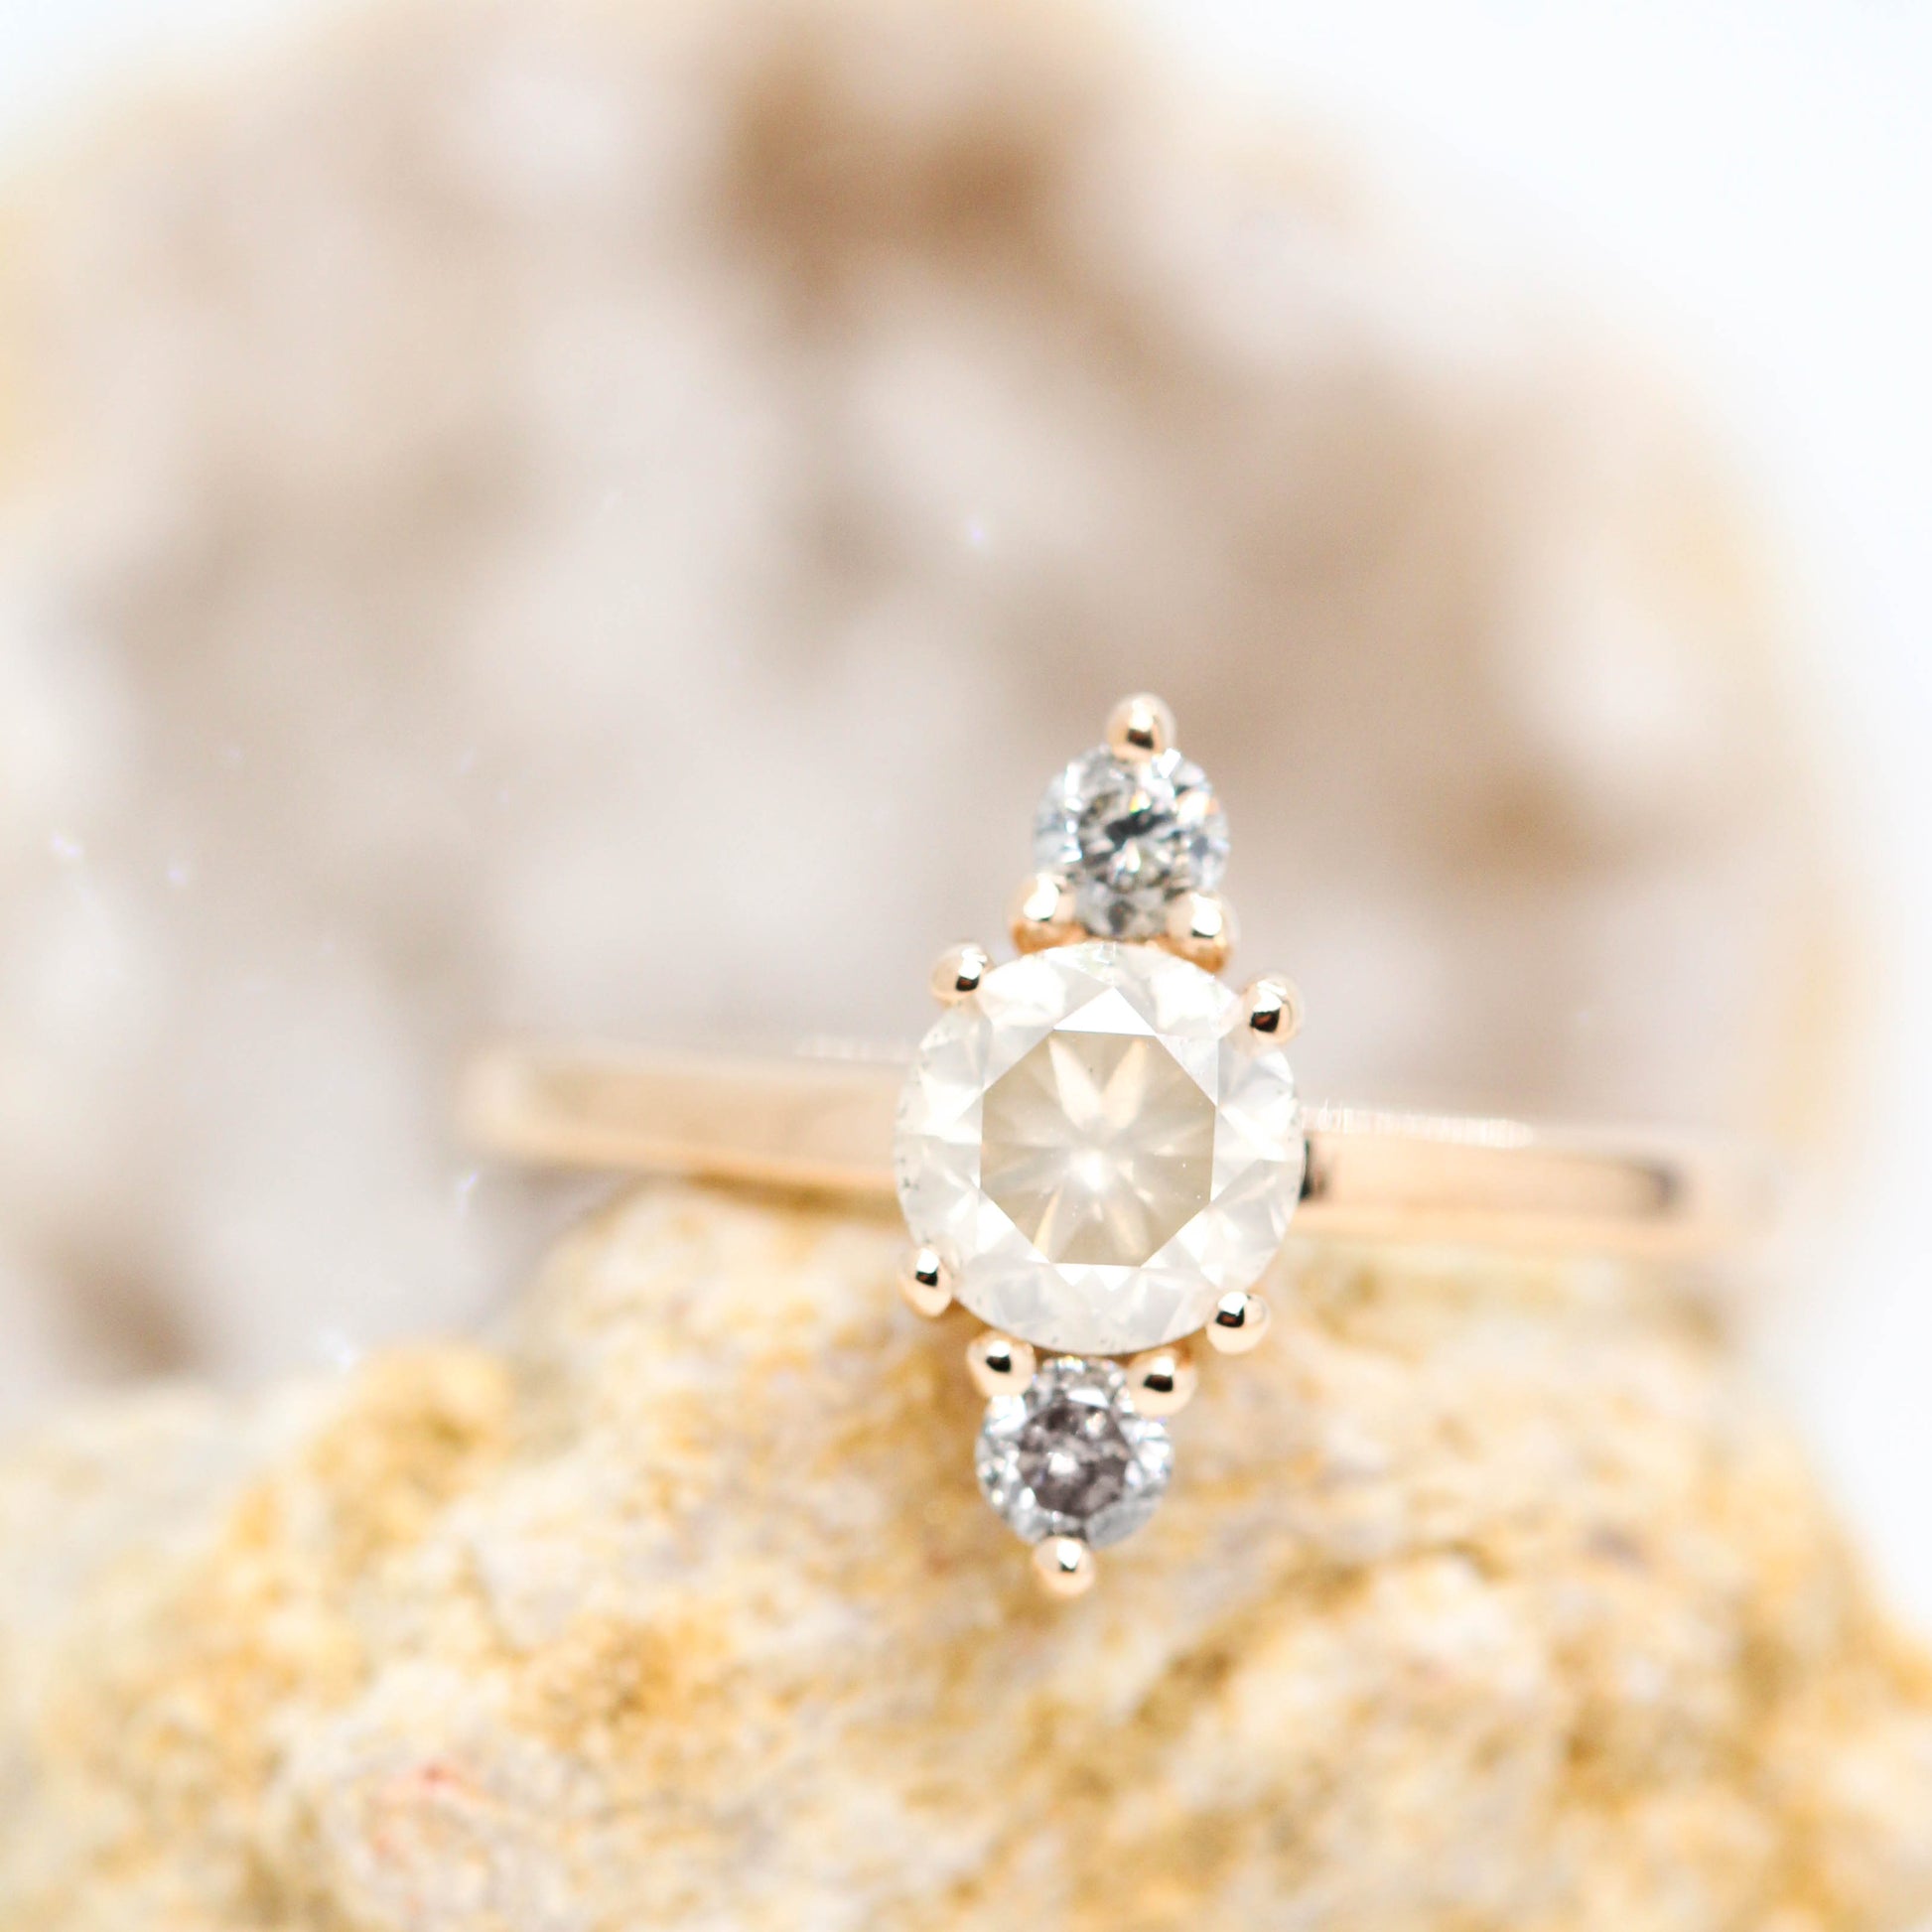 Everest Ring with a 1.07 Carat White Salt and Pepper Diamond and Gray Accent Diamonds in 14k Champagne Gold - Ready to Size and Ship - Midwinter Co. Alternative Bridal Rings and Modern Fine Jewelry